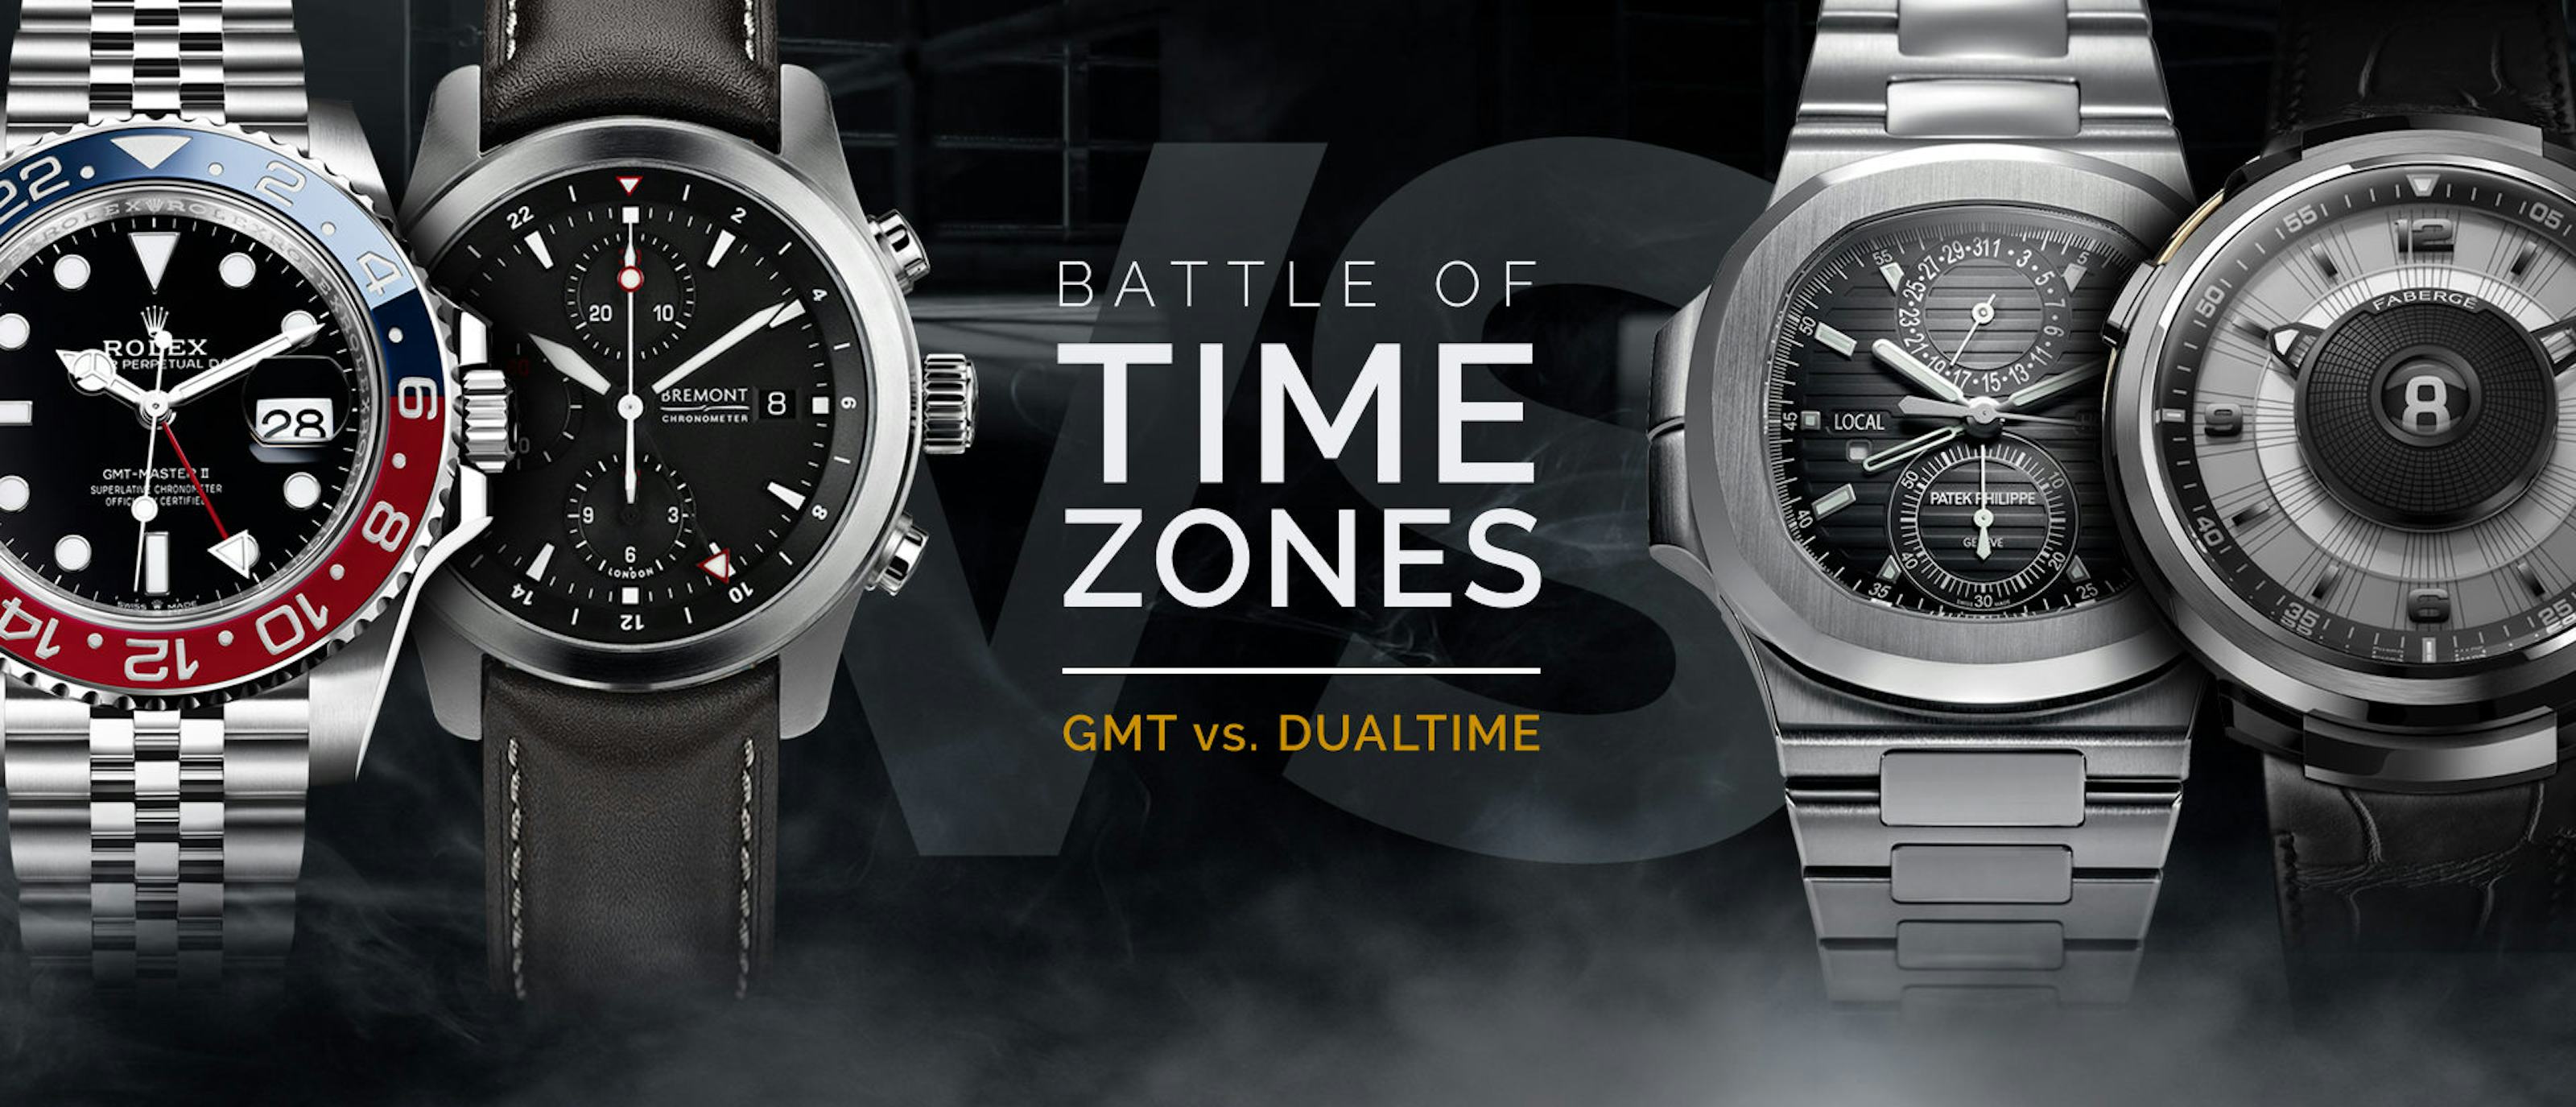 GMT vs. Dual Time Watches | Blog